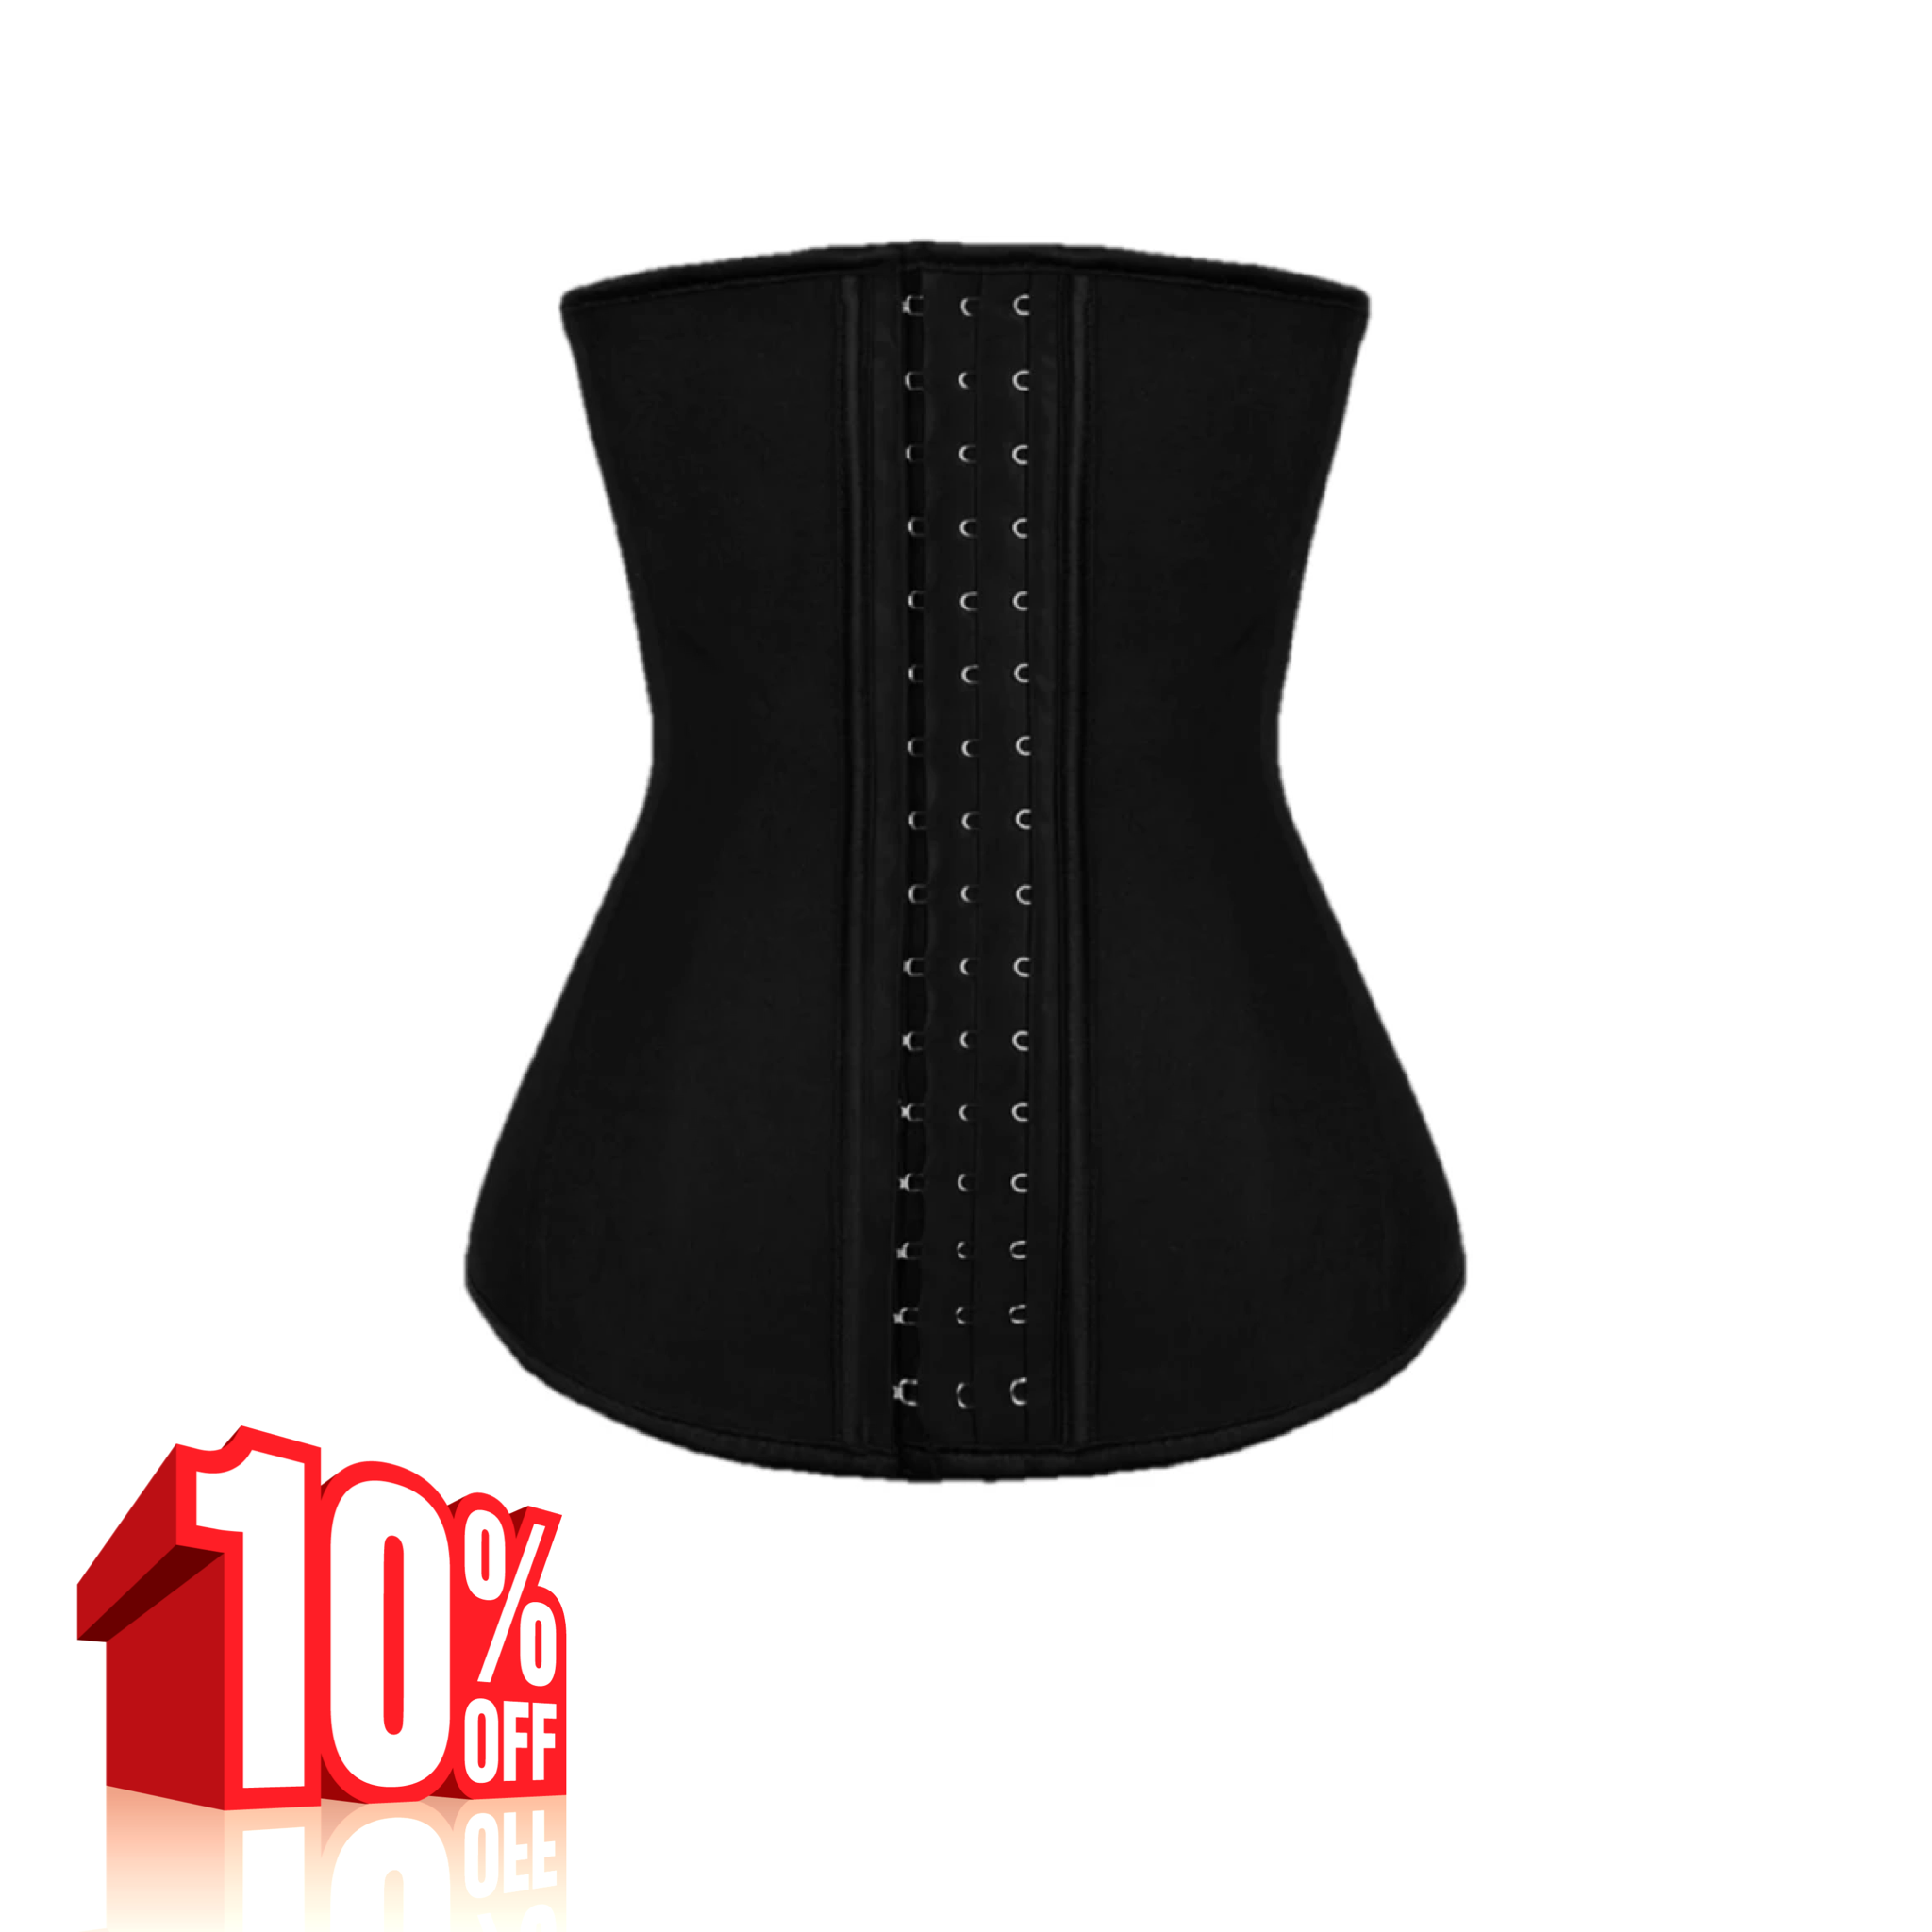 Fagas Colombianas Waist Trainer - Black